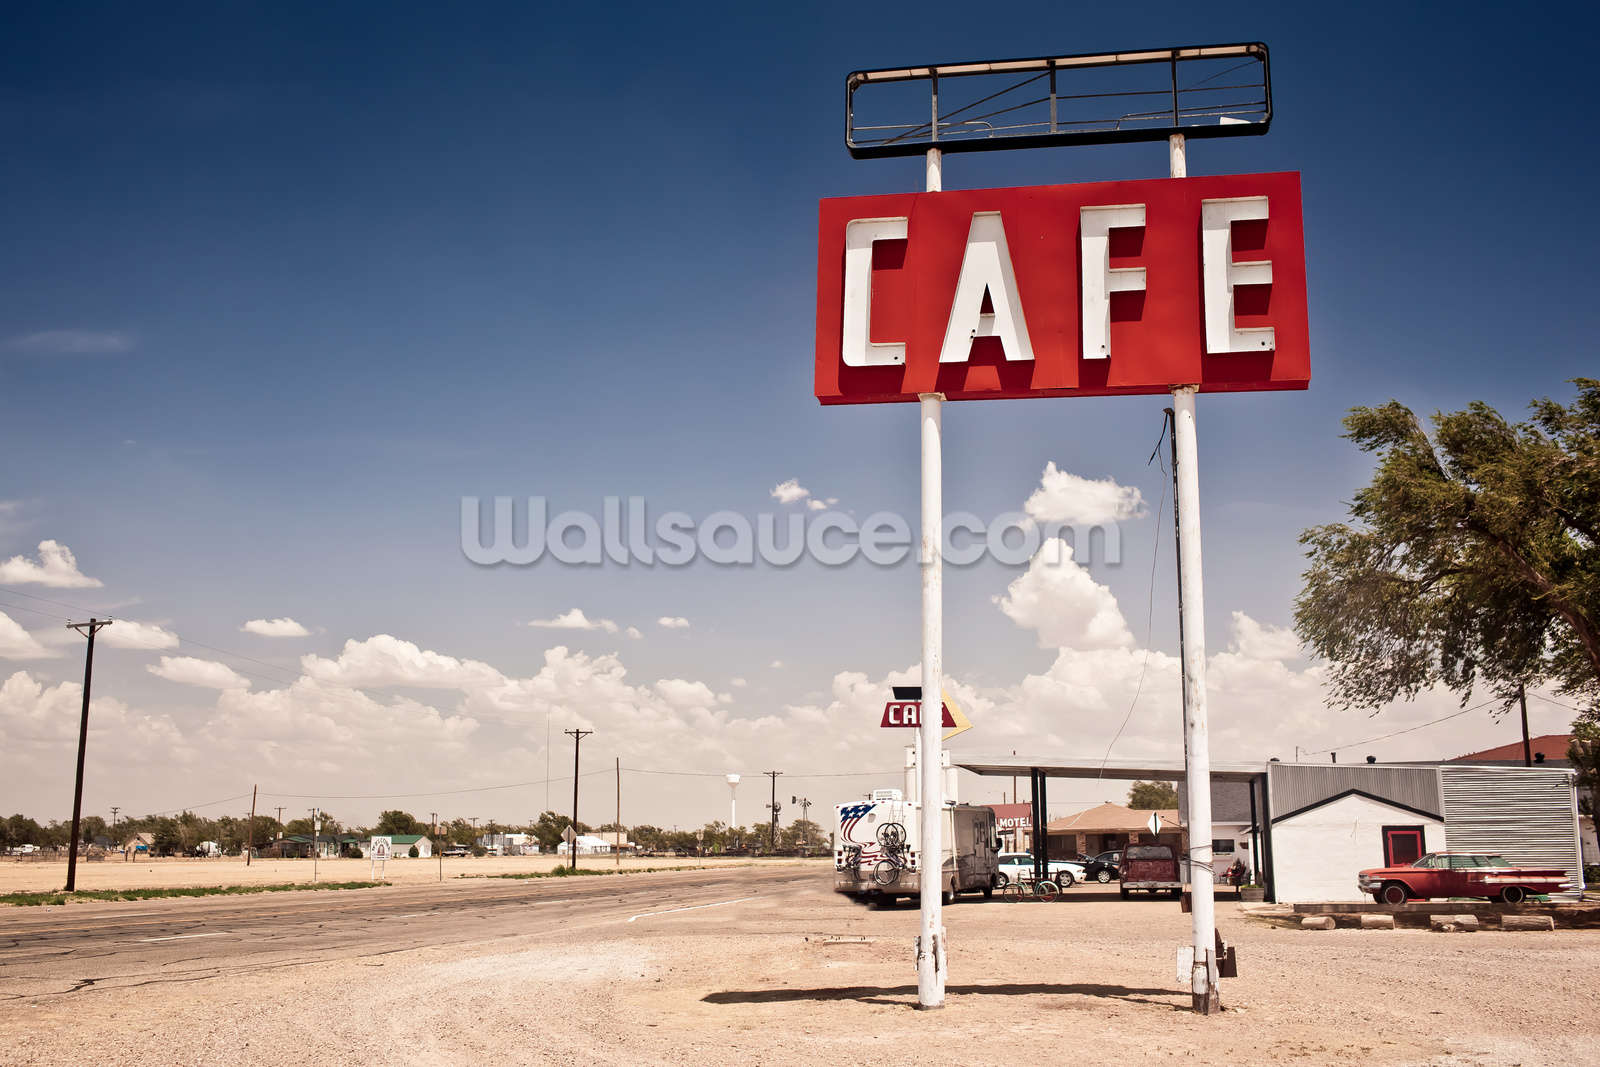 Route Cafe Wall Mural Wallpaper